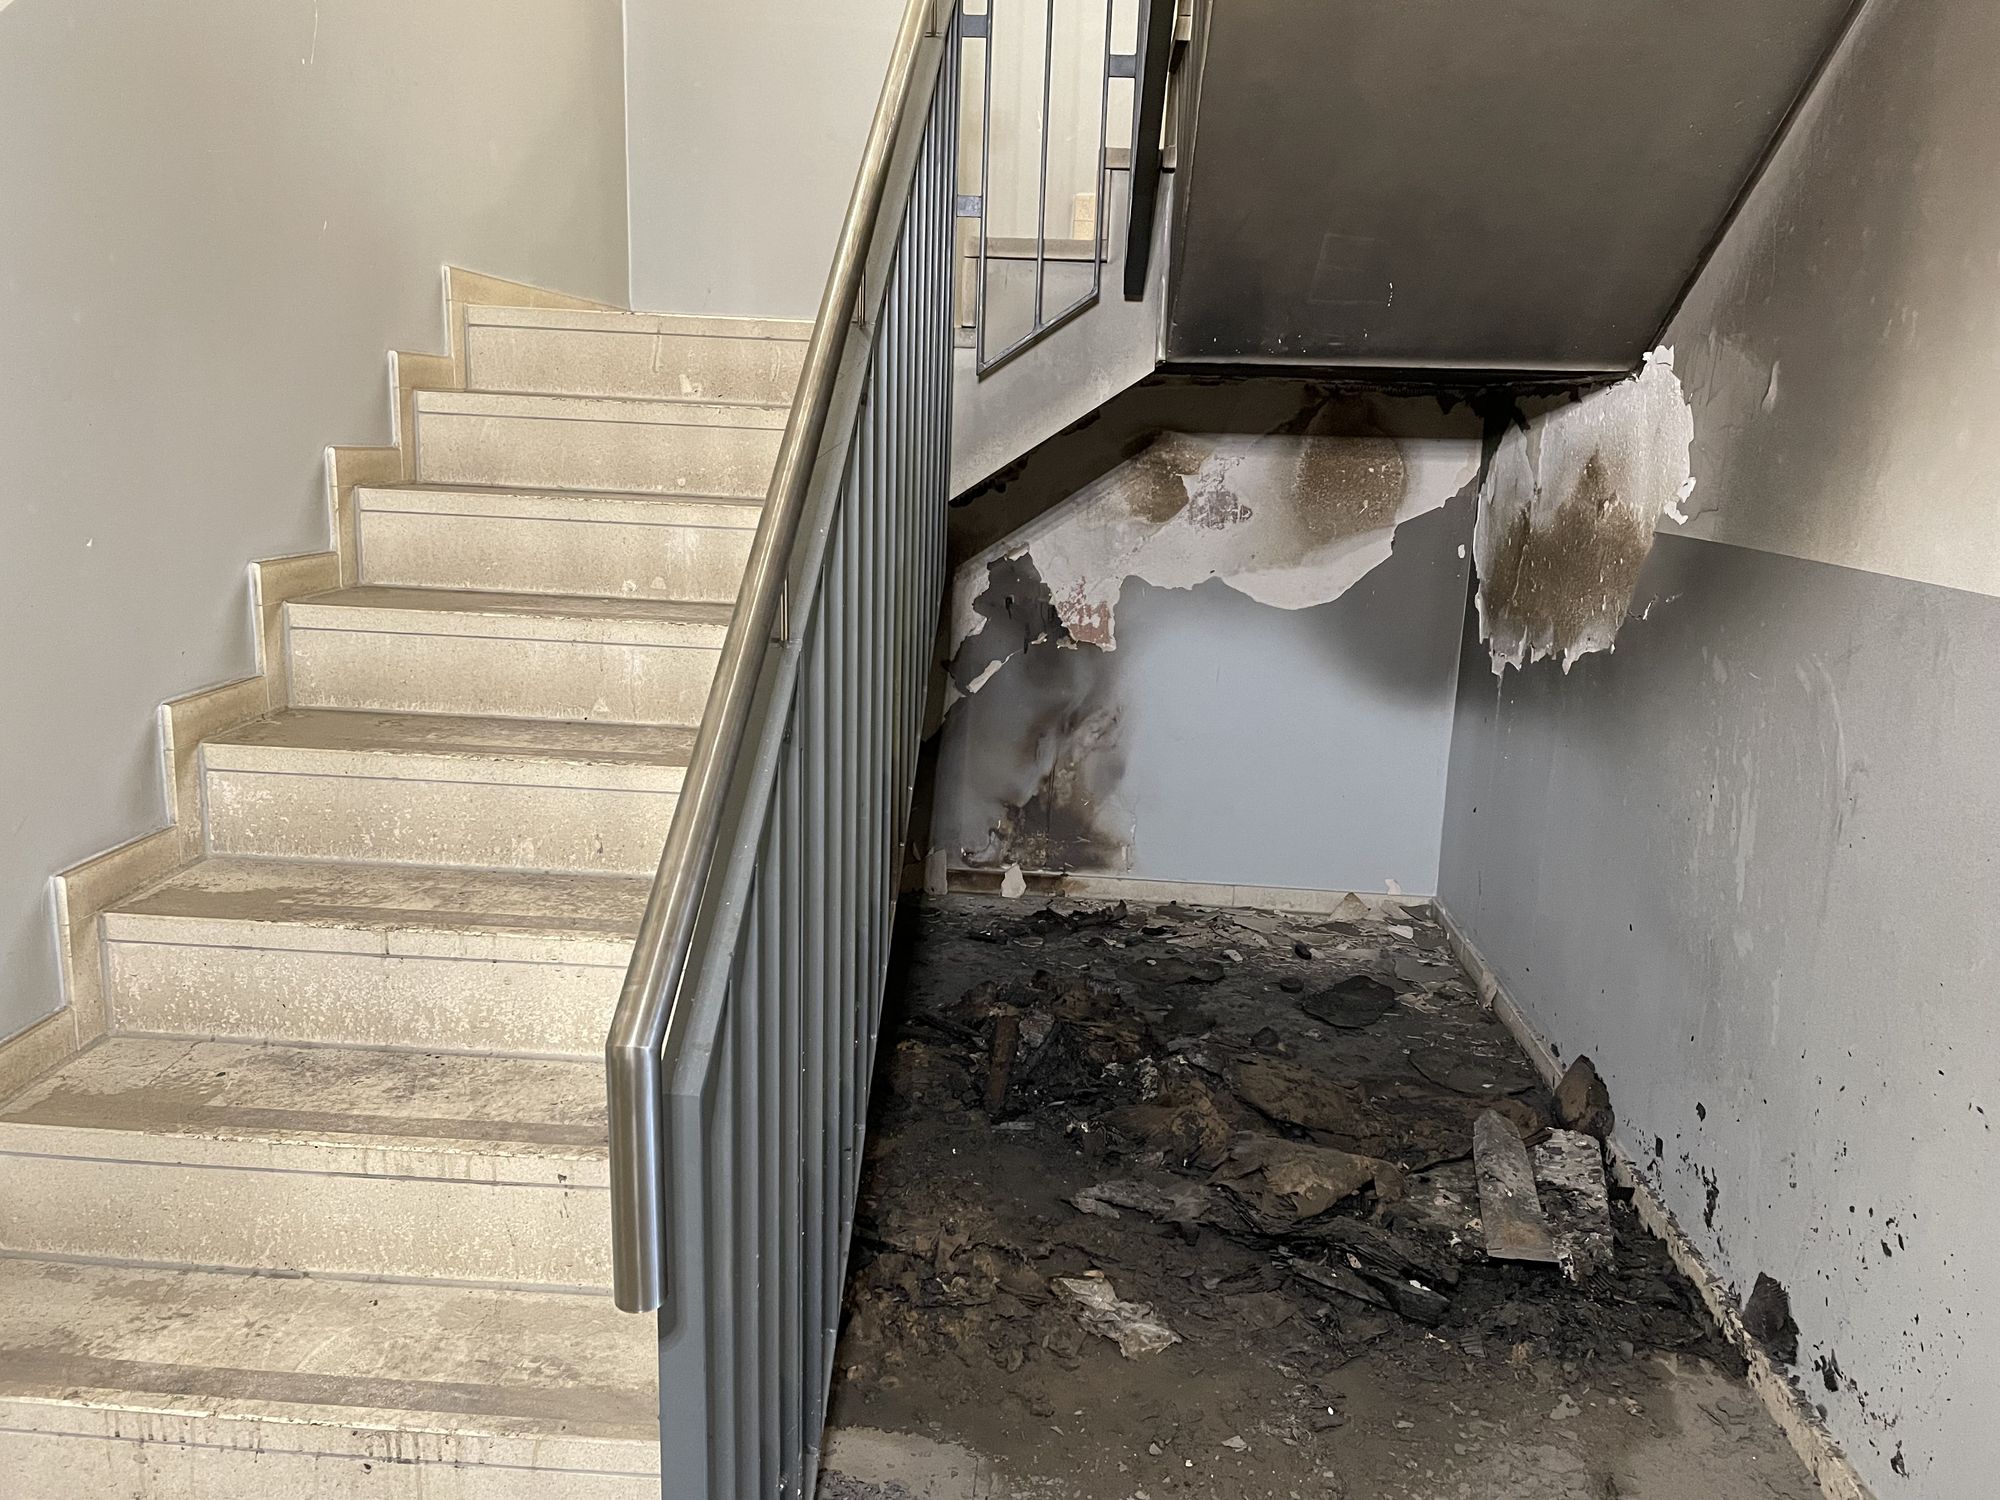 Black ash and soot underneath the stairwell of an apartment building.